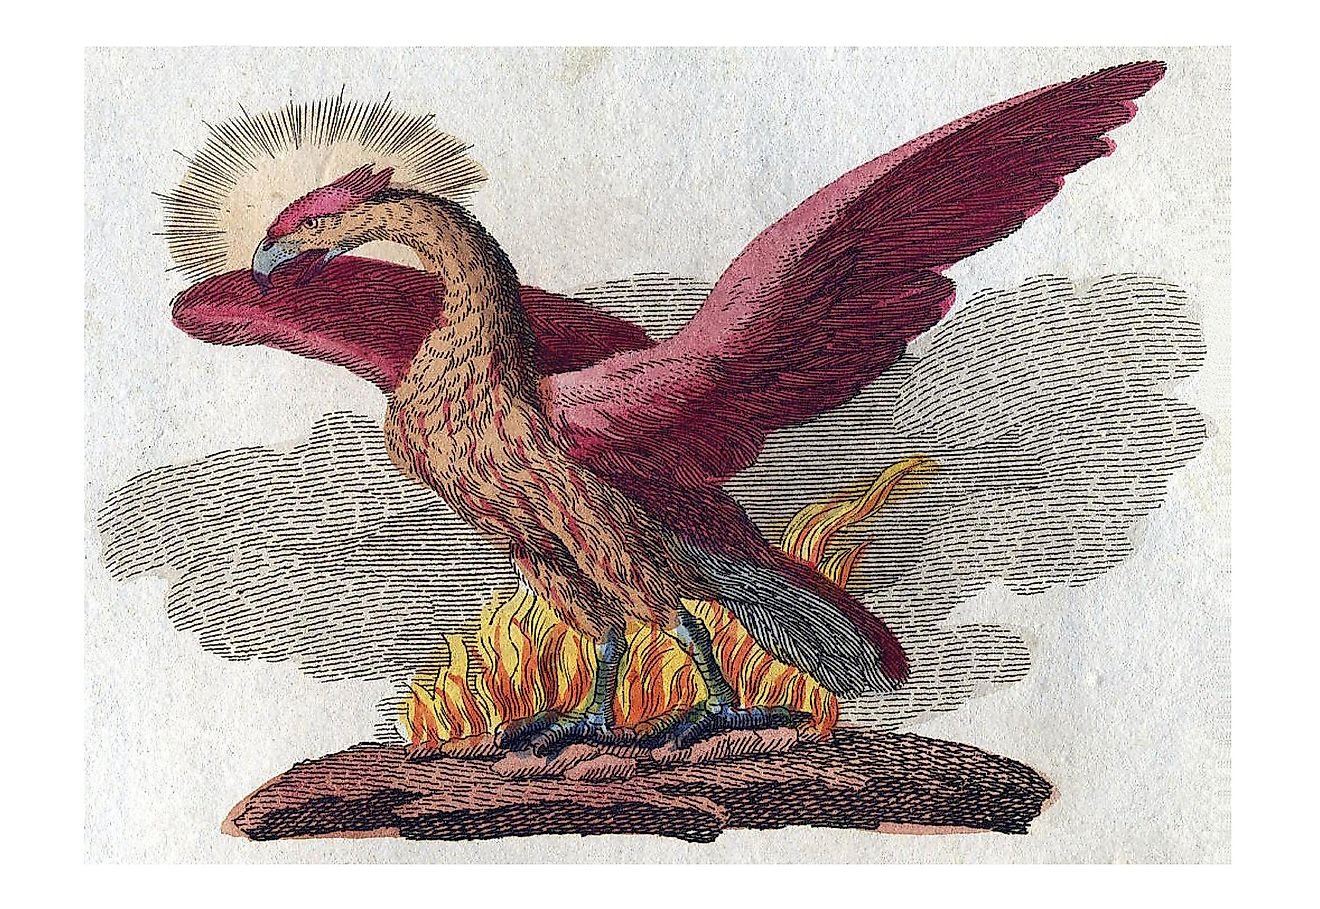 The Phoenix: How This Mythical Bird Became a Symbol of Rebirth